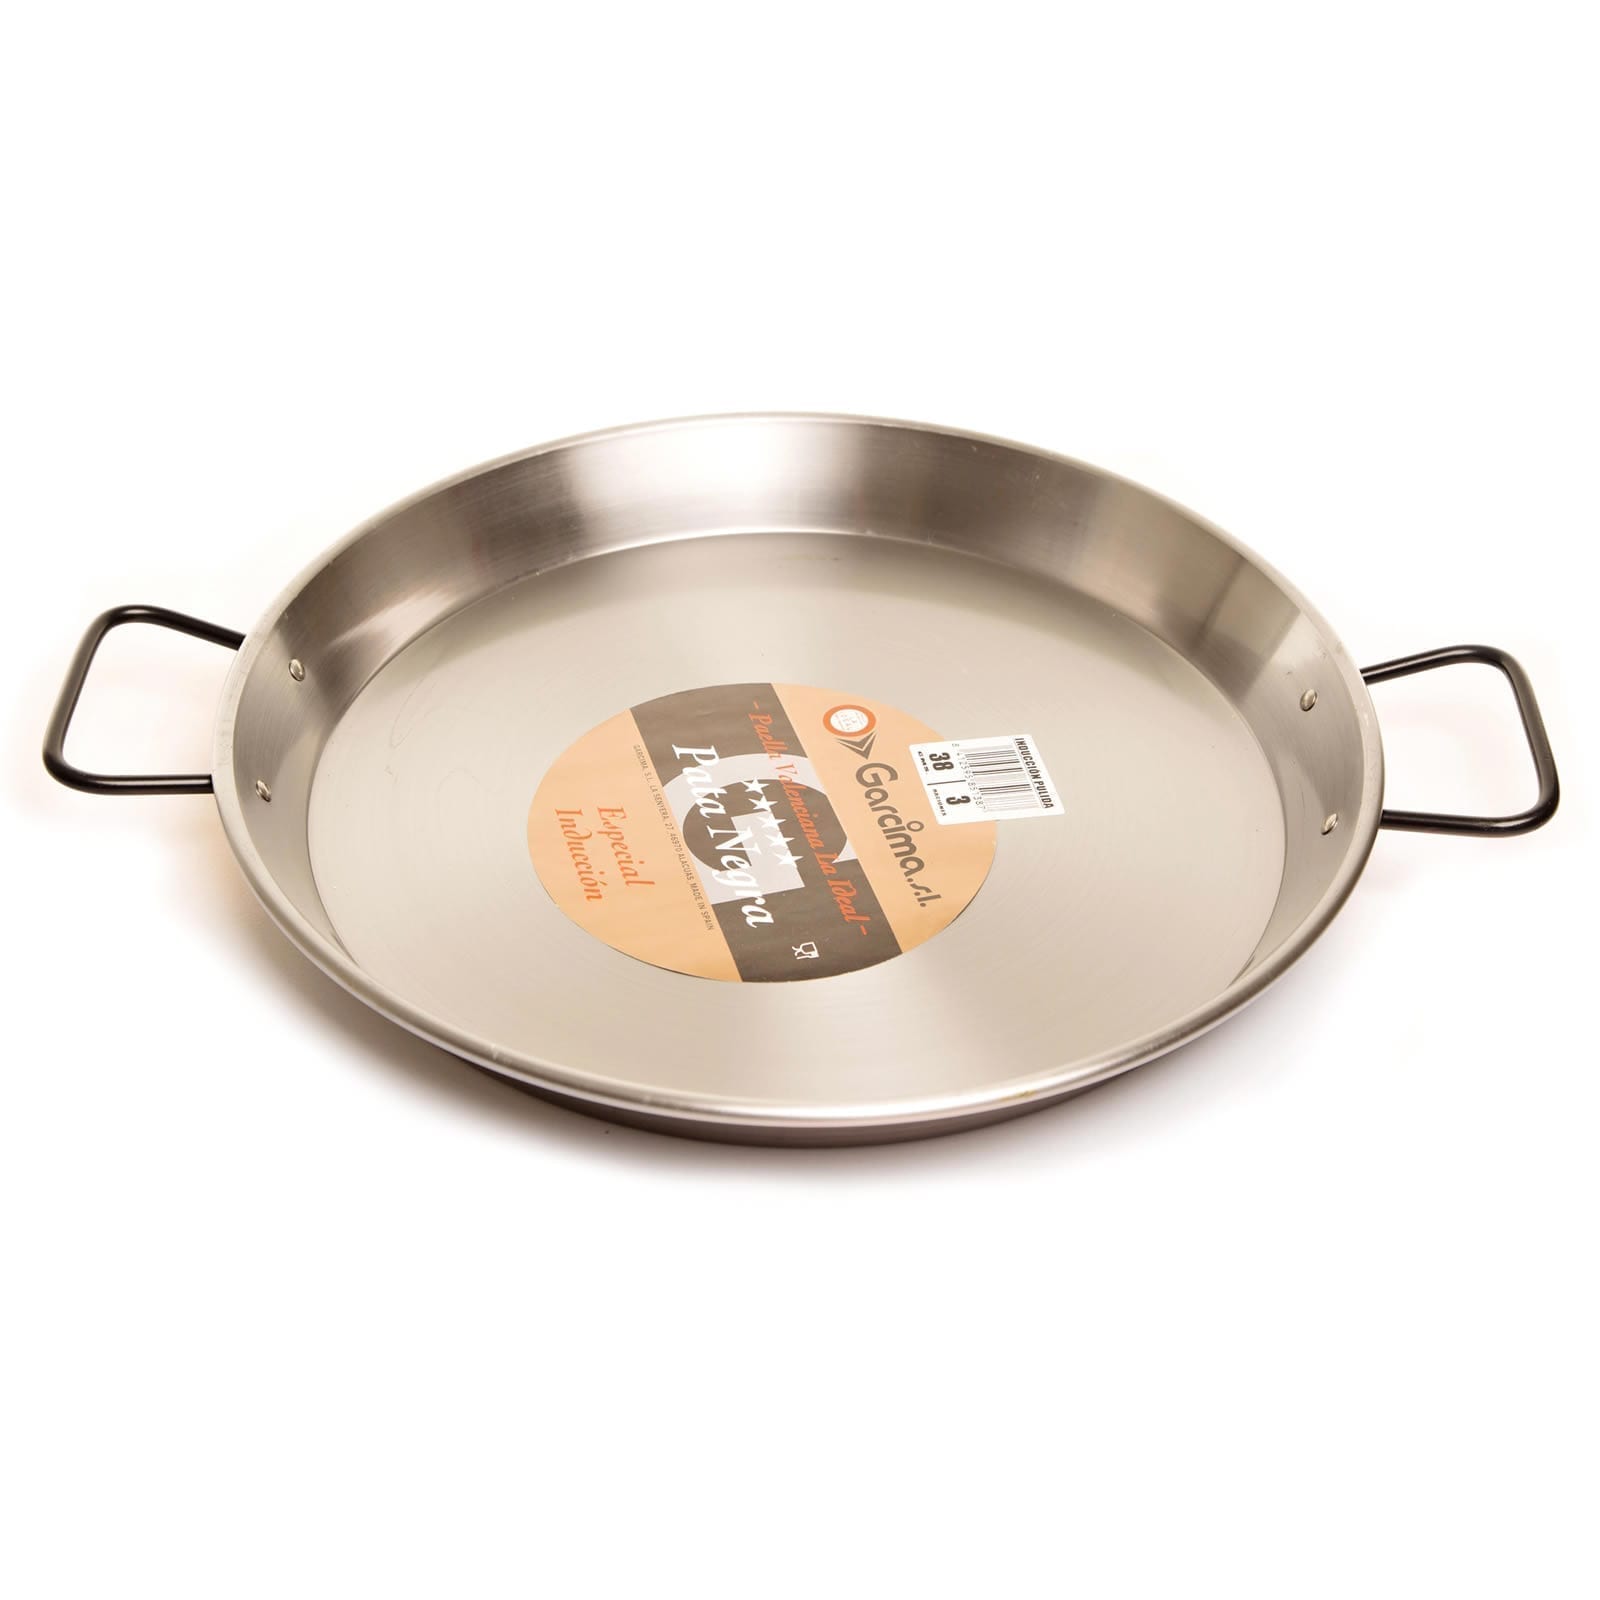 Stir-Fry and Paella Pan 14 Inches Stainless Steel Grill Pan with Double Handles for Big Green Egg Induction Ready Pan for Chicken and Restaurant Great for Rice or Stir Frys 